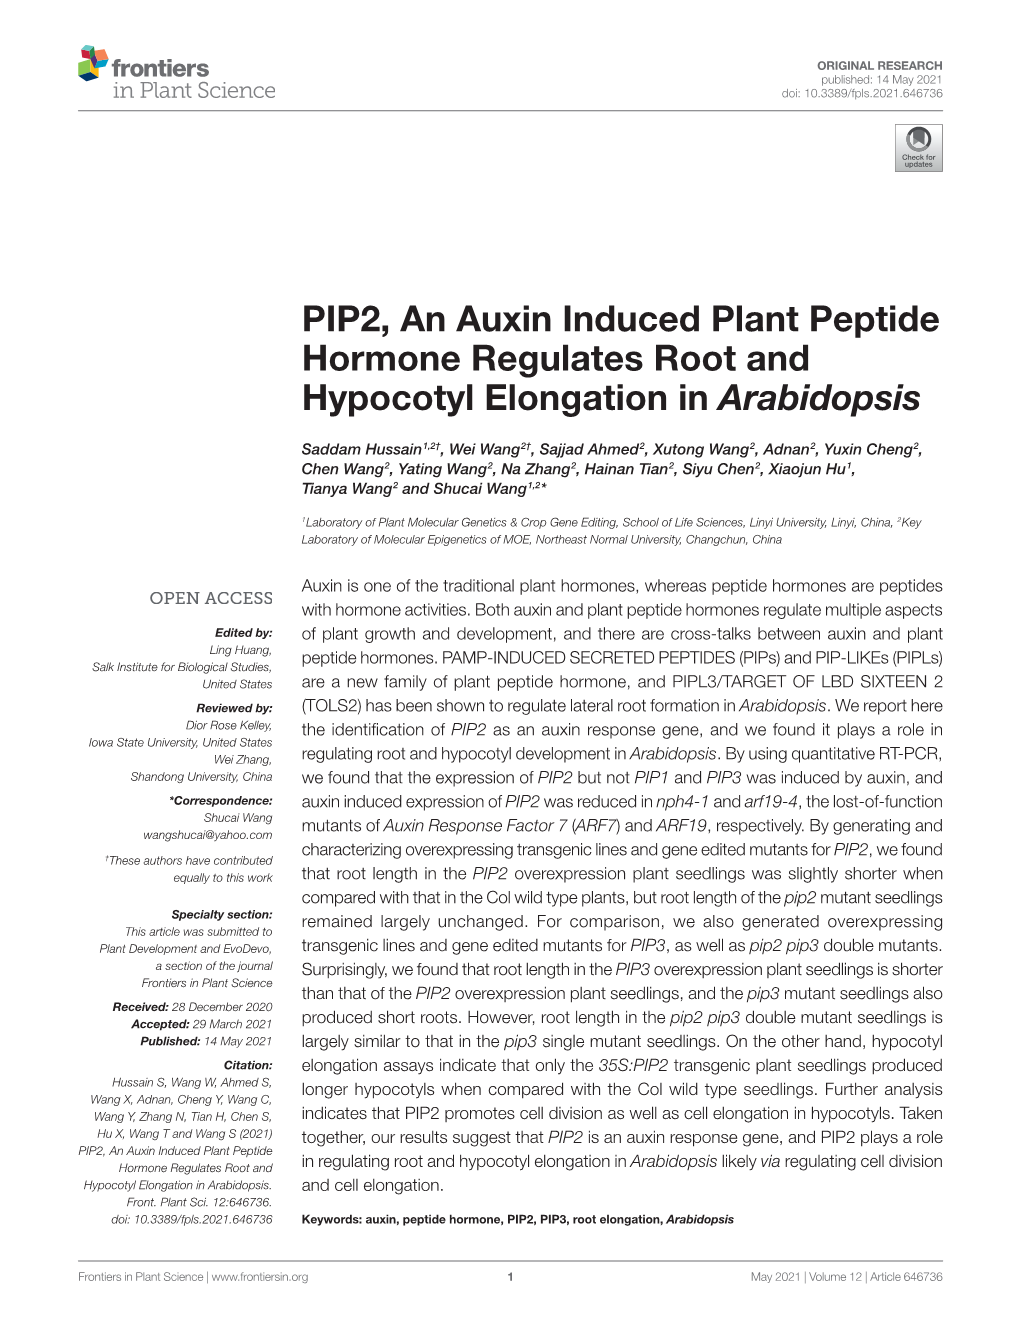 PIP2, an Auxin Induced Plant Peptide Hormone Regulates Root and Hypocotyl Elongation in Arabidopsis